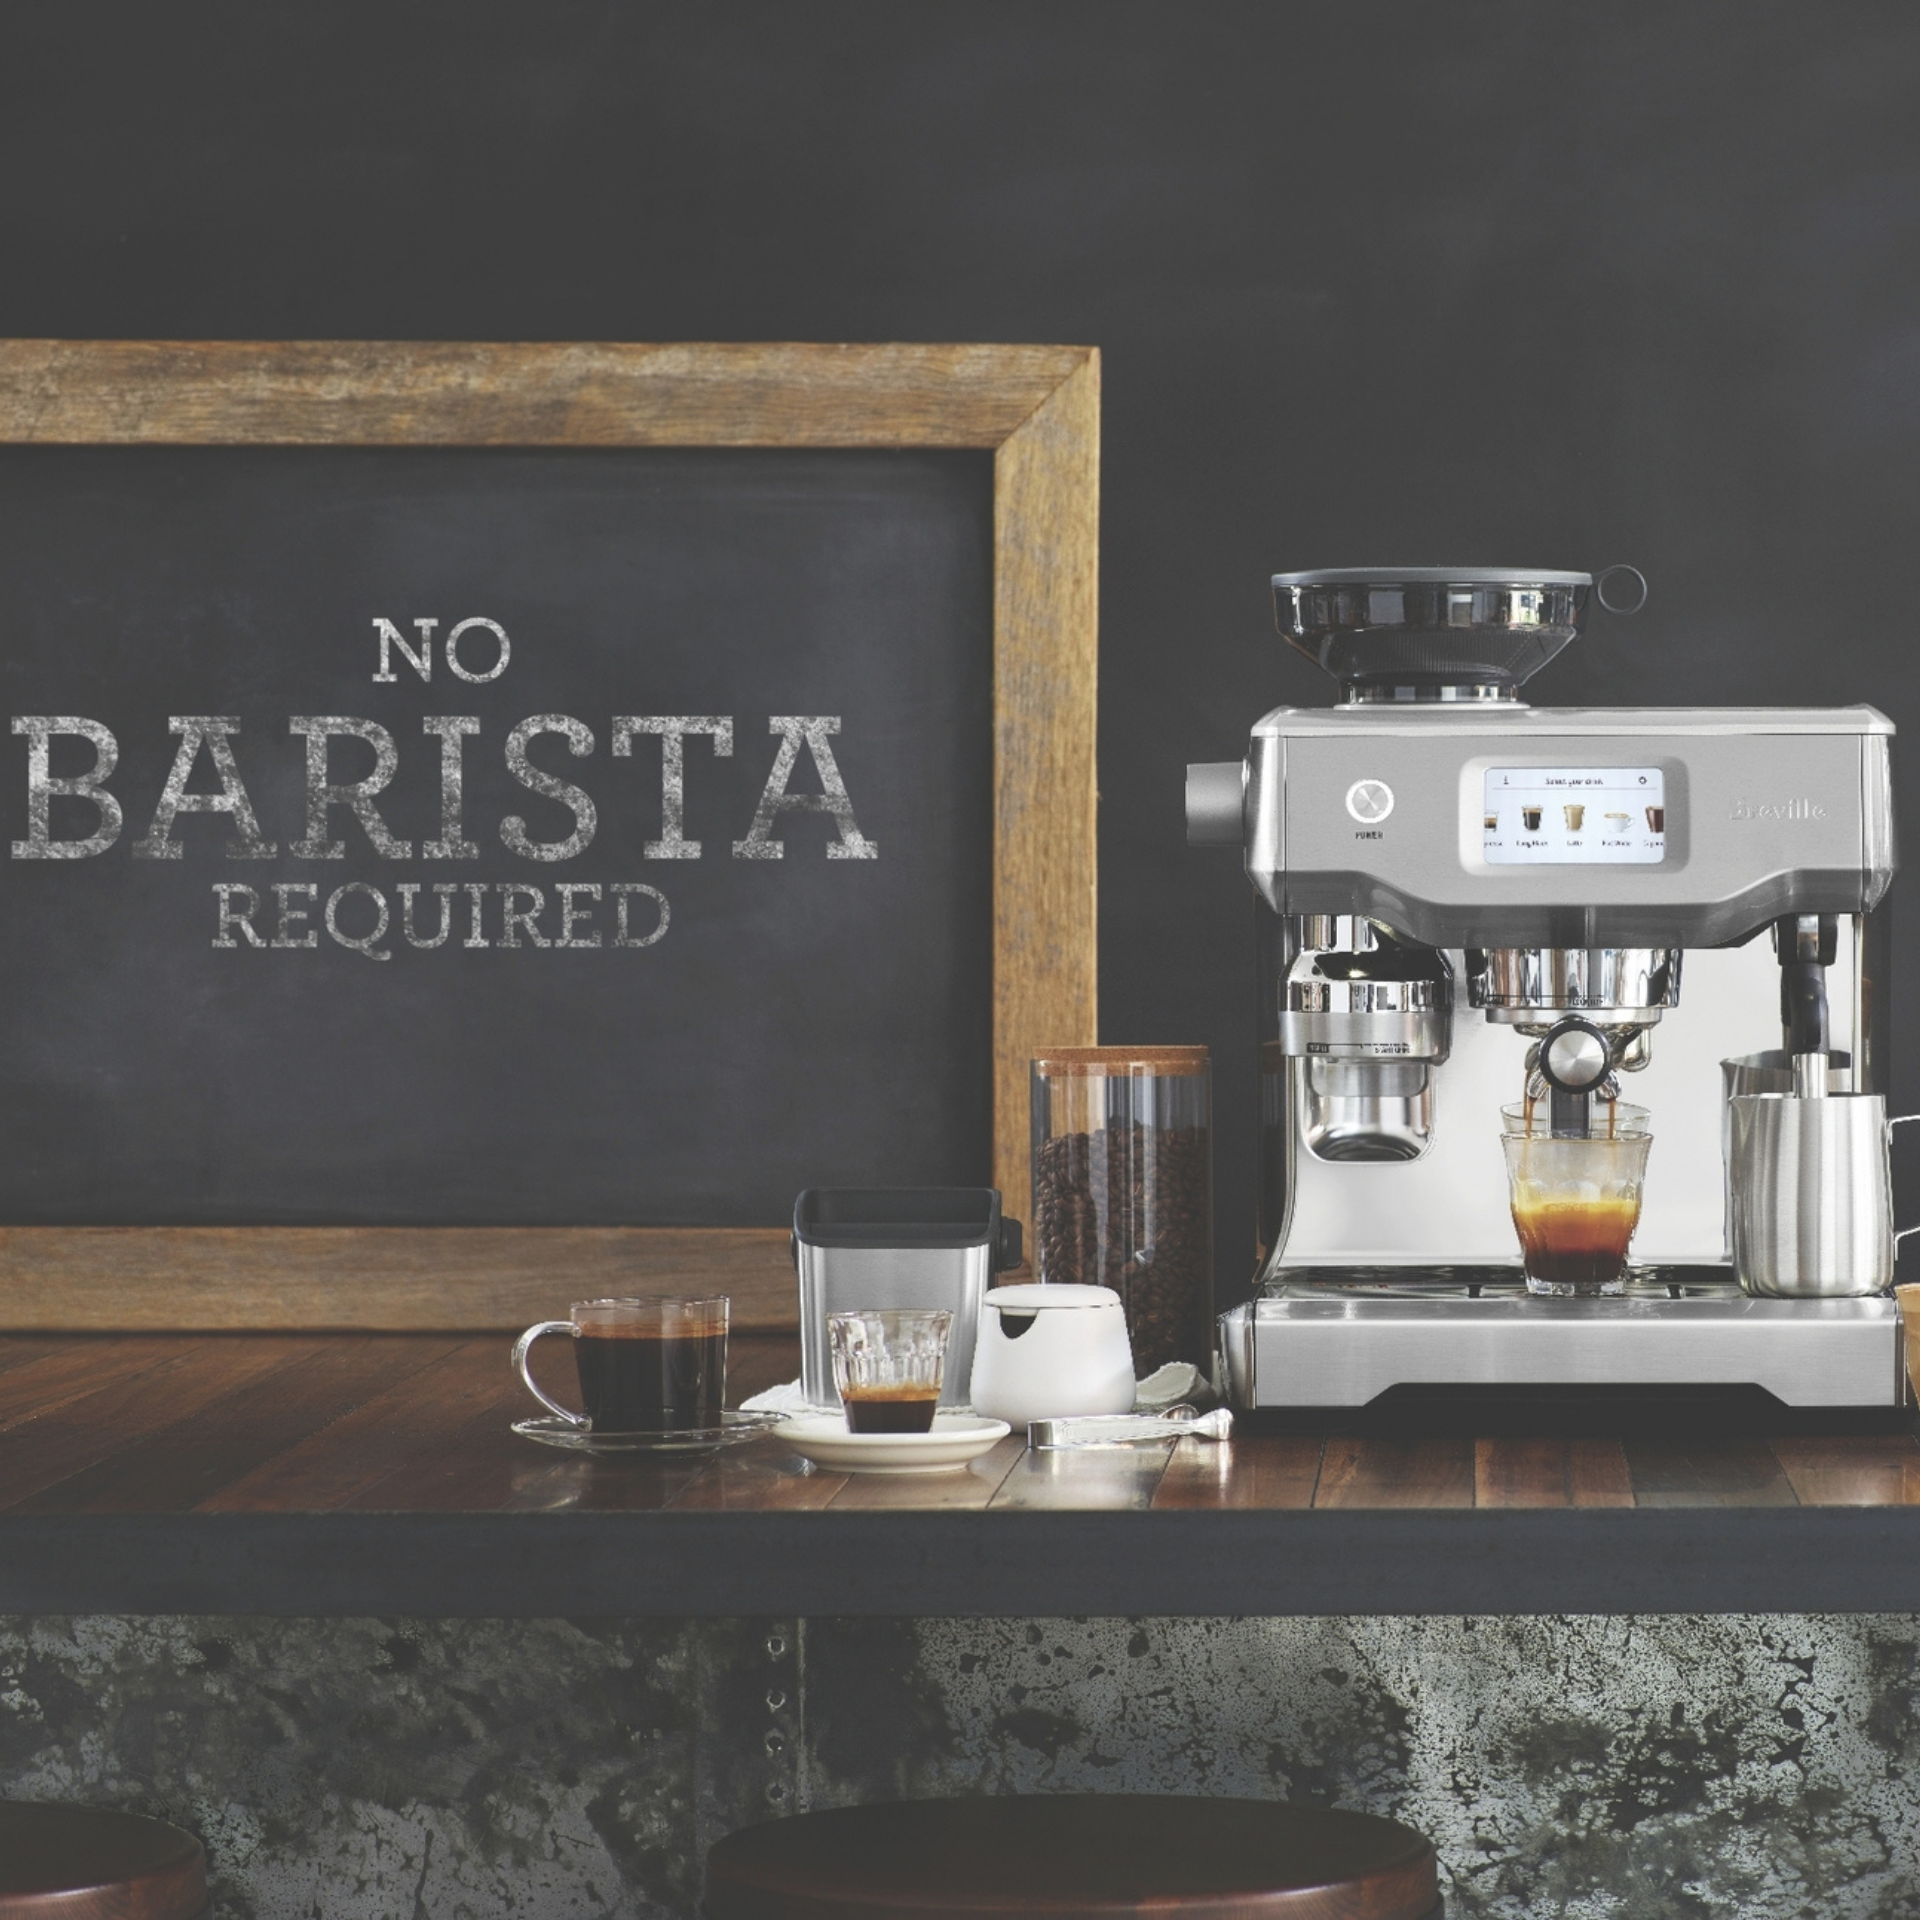 Breville Oracle Touch Espresso Machine with 'No Barista required' sign